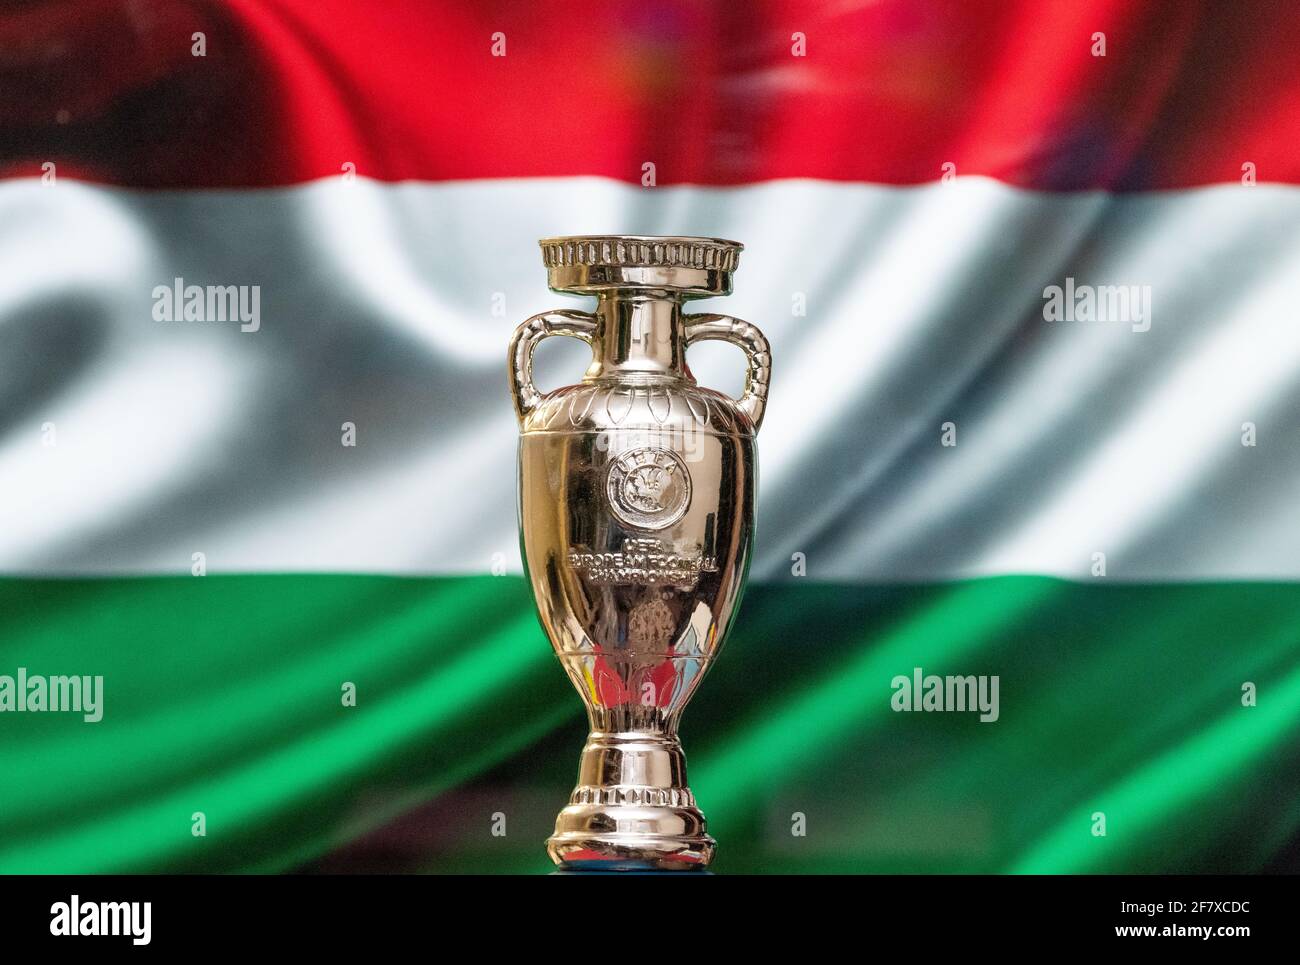 Hungarian Cup Final Image & Photo (Free Trial)